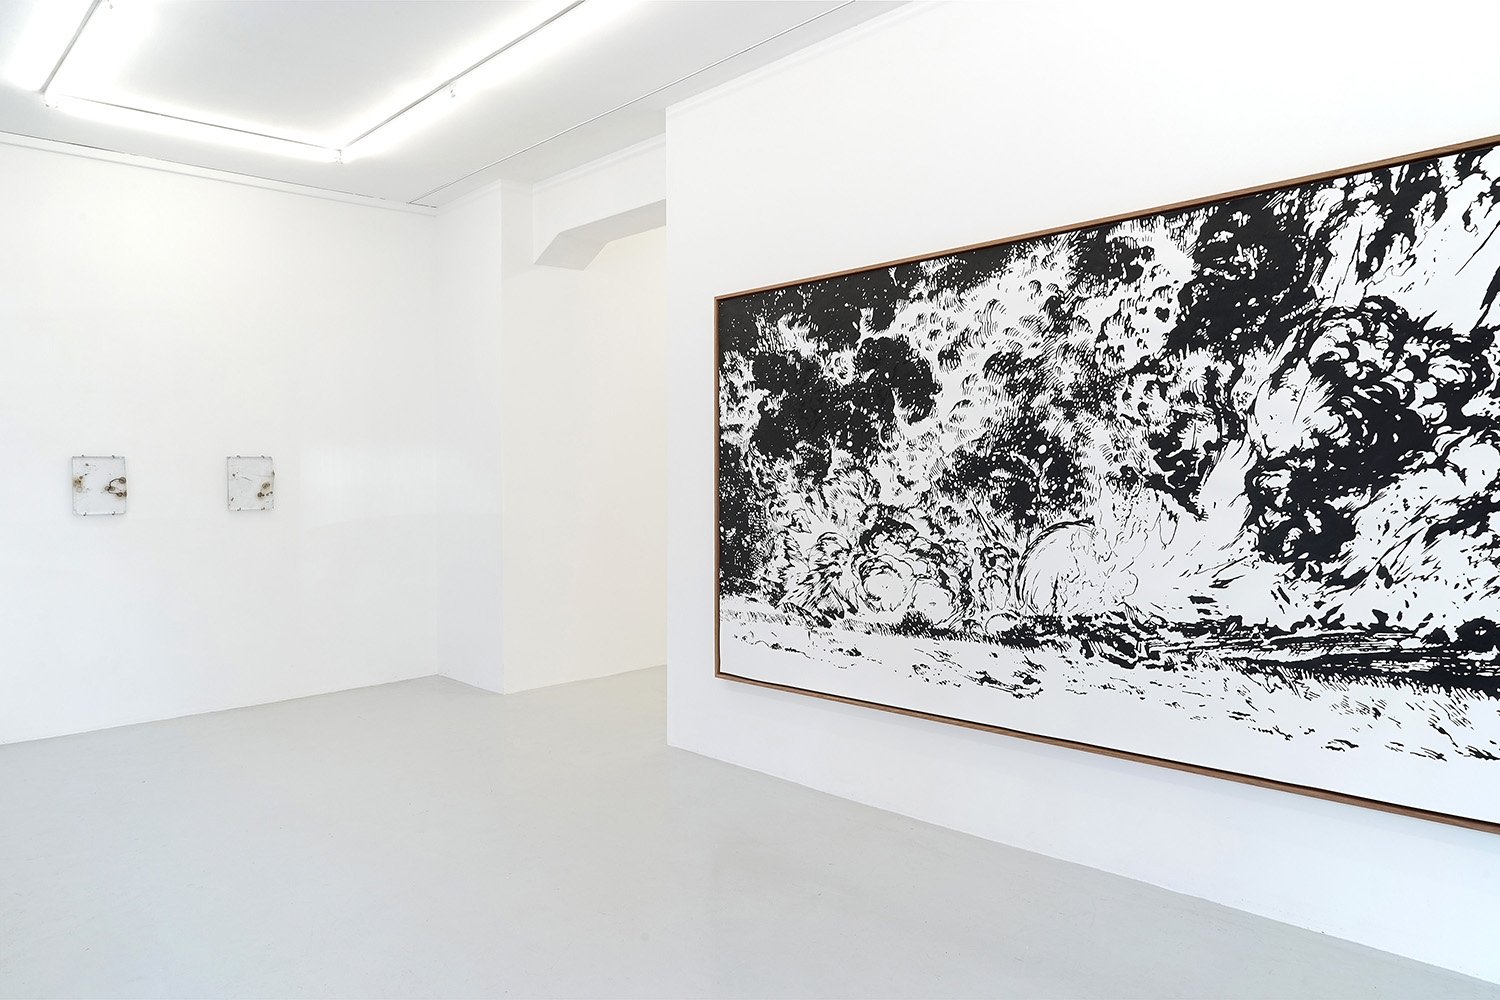  left: by Julia Steiner:  Cosmos (Branch) 1, Cosmos (Branch) 3 , Glass, branches, unique, 35 x 28 x 4 cm  right:  Nothing Else Matters , 2021, ink on paper, 190 x 380 cm   Landscape with Landscape  at Lullin + Ferrari, Zürich 